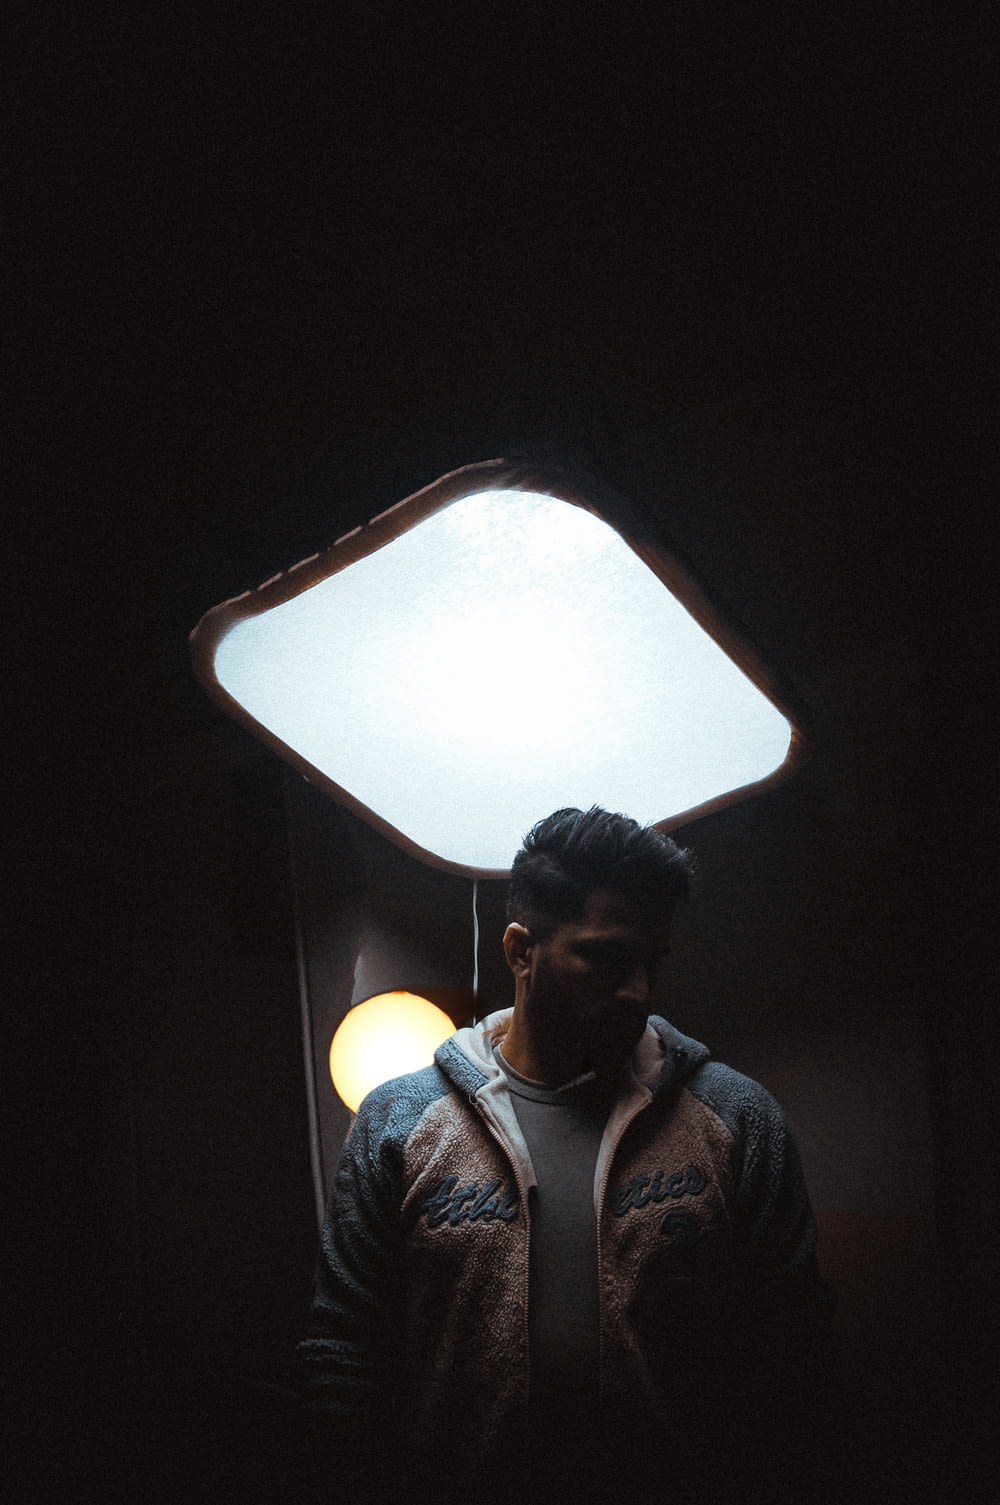 a man standing in front of a light in a dark room